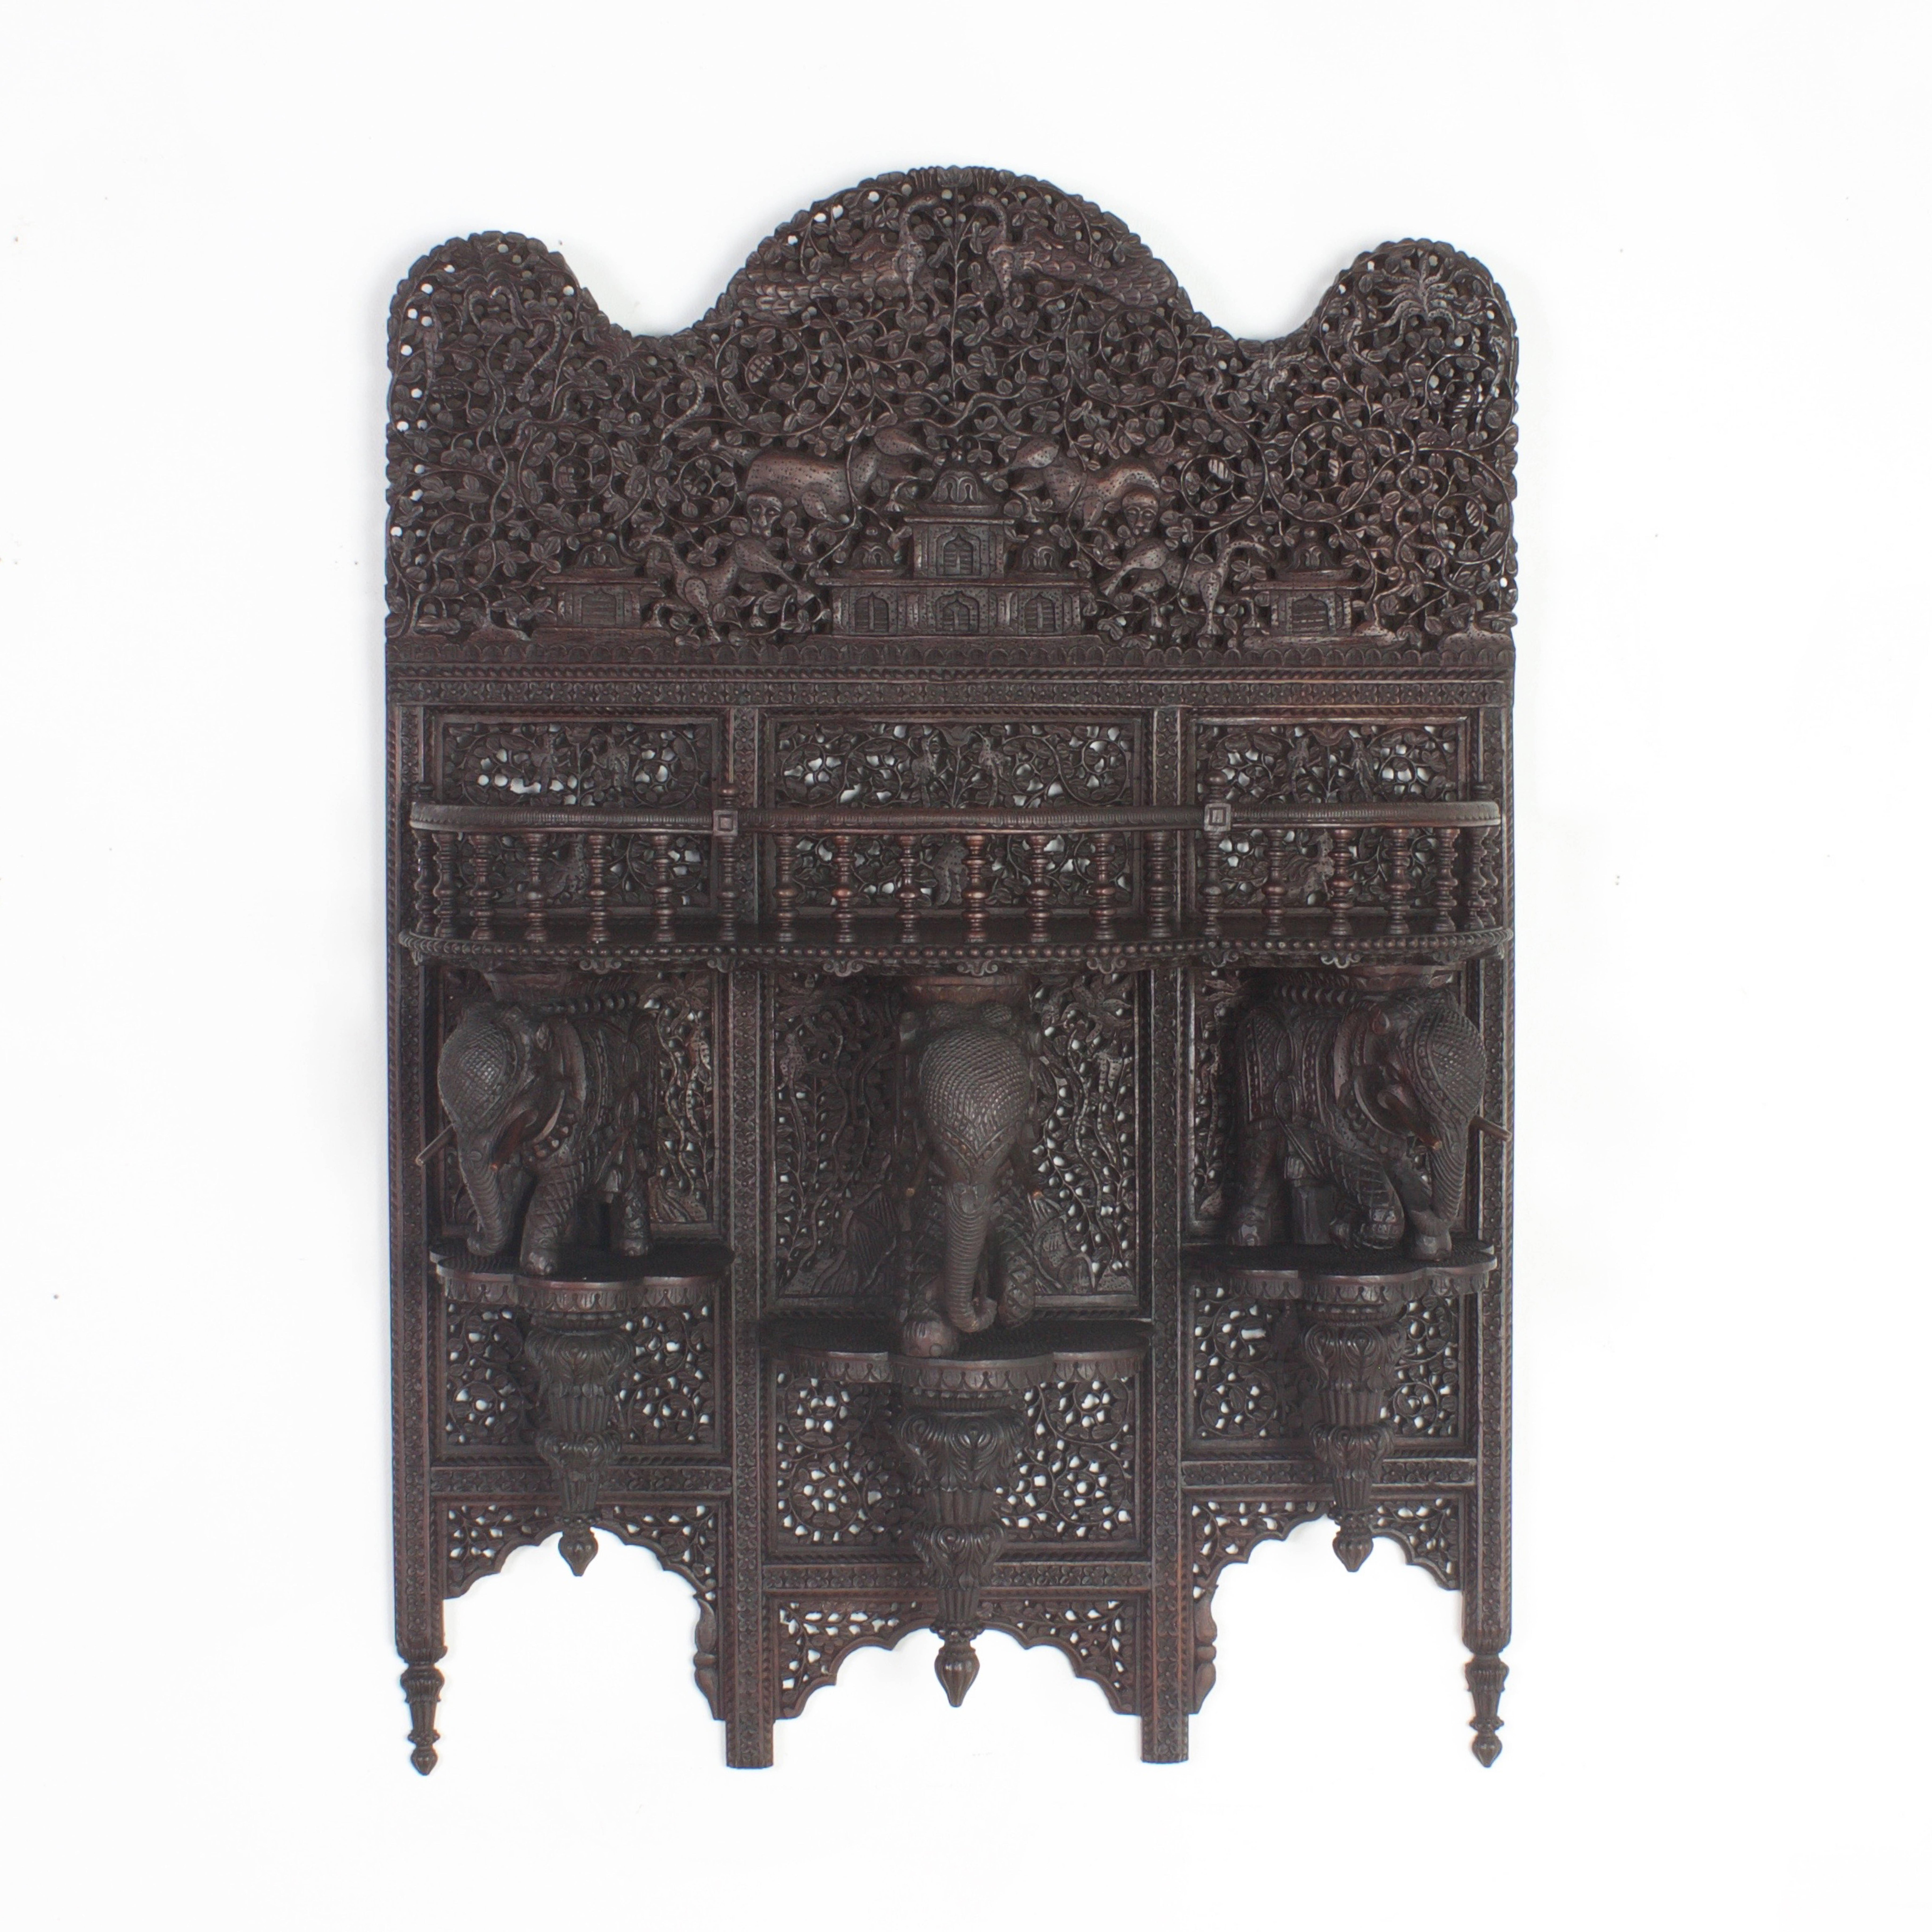 Antique Anglo-Indian carved hardwood wall or hanging shelf. The upper part is carved in an elaborate composition of architecture, vines, and animals including peacocks, monkeys, dragons, and cats. All that above a gallery supported by three